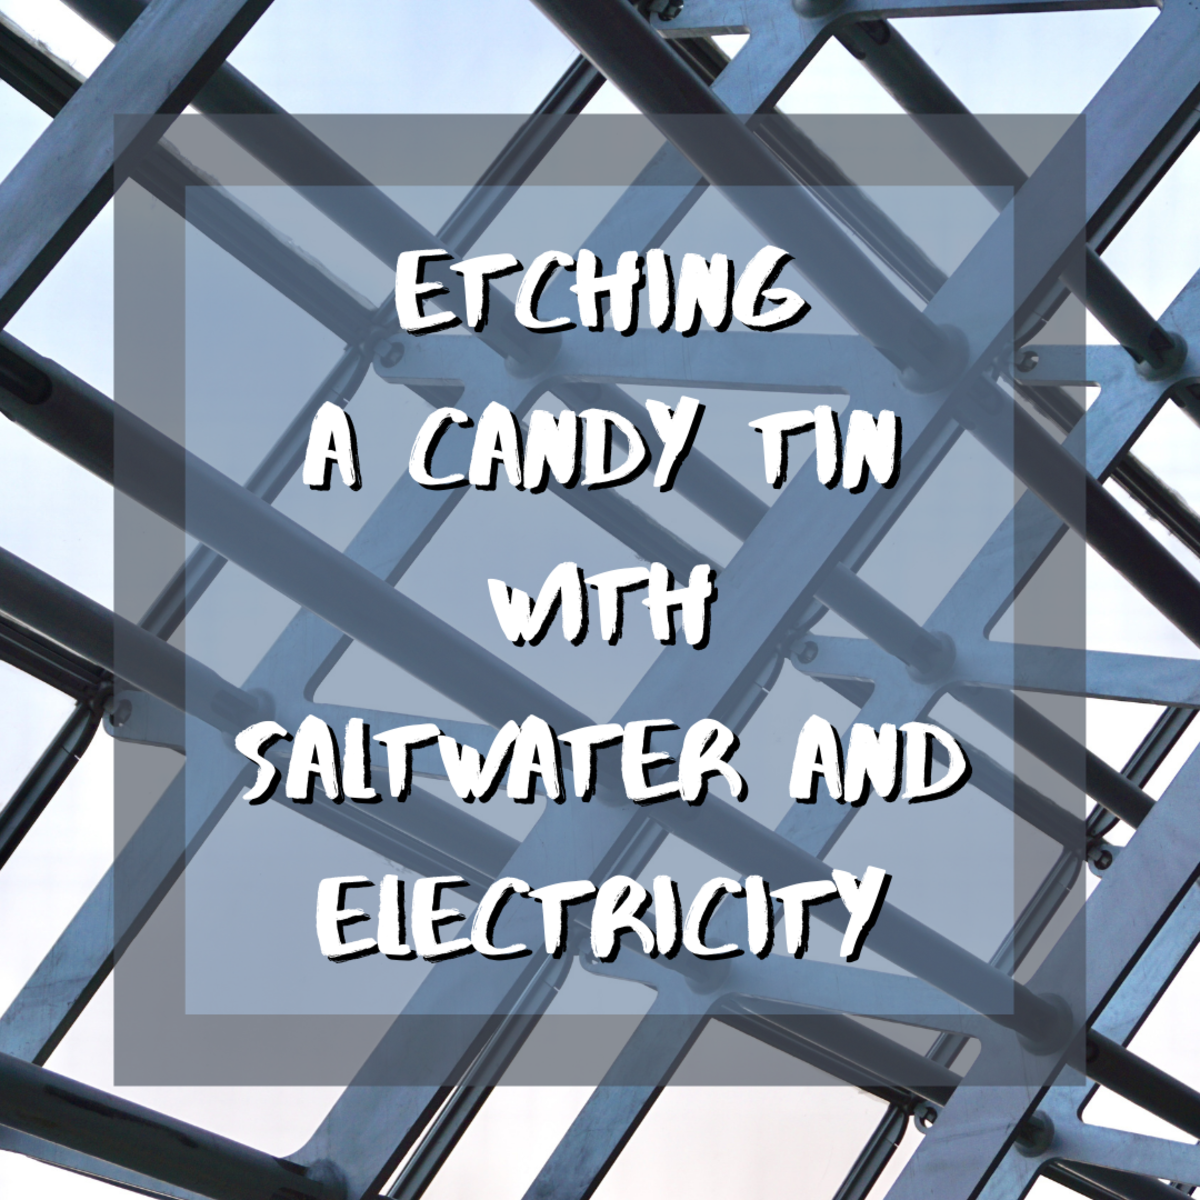 Learn how to create a unique etching in an old candy tin with these easy step-by-step instructions!